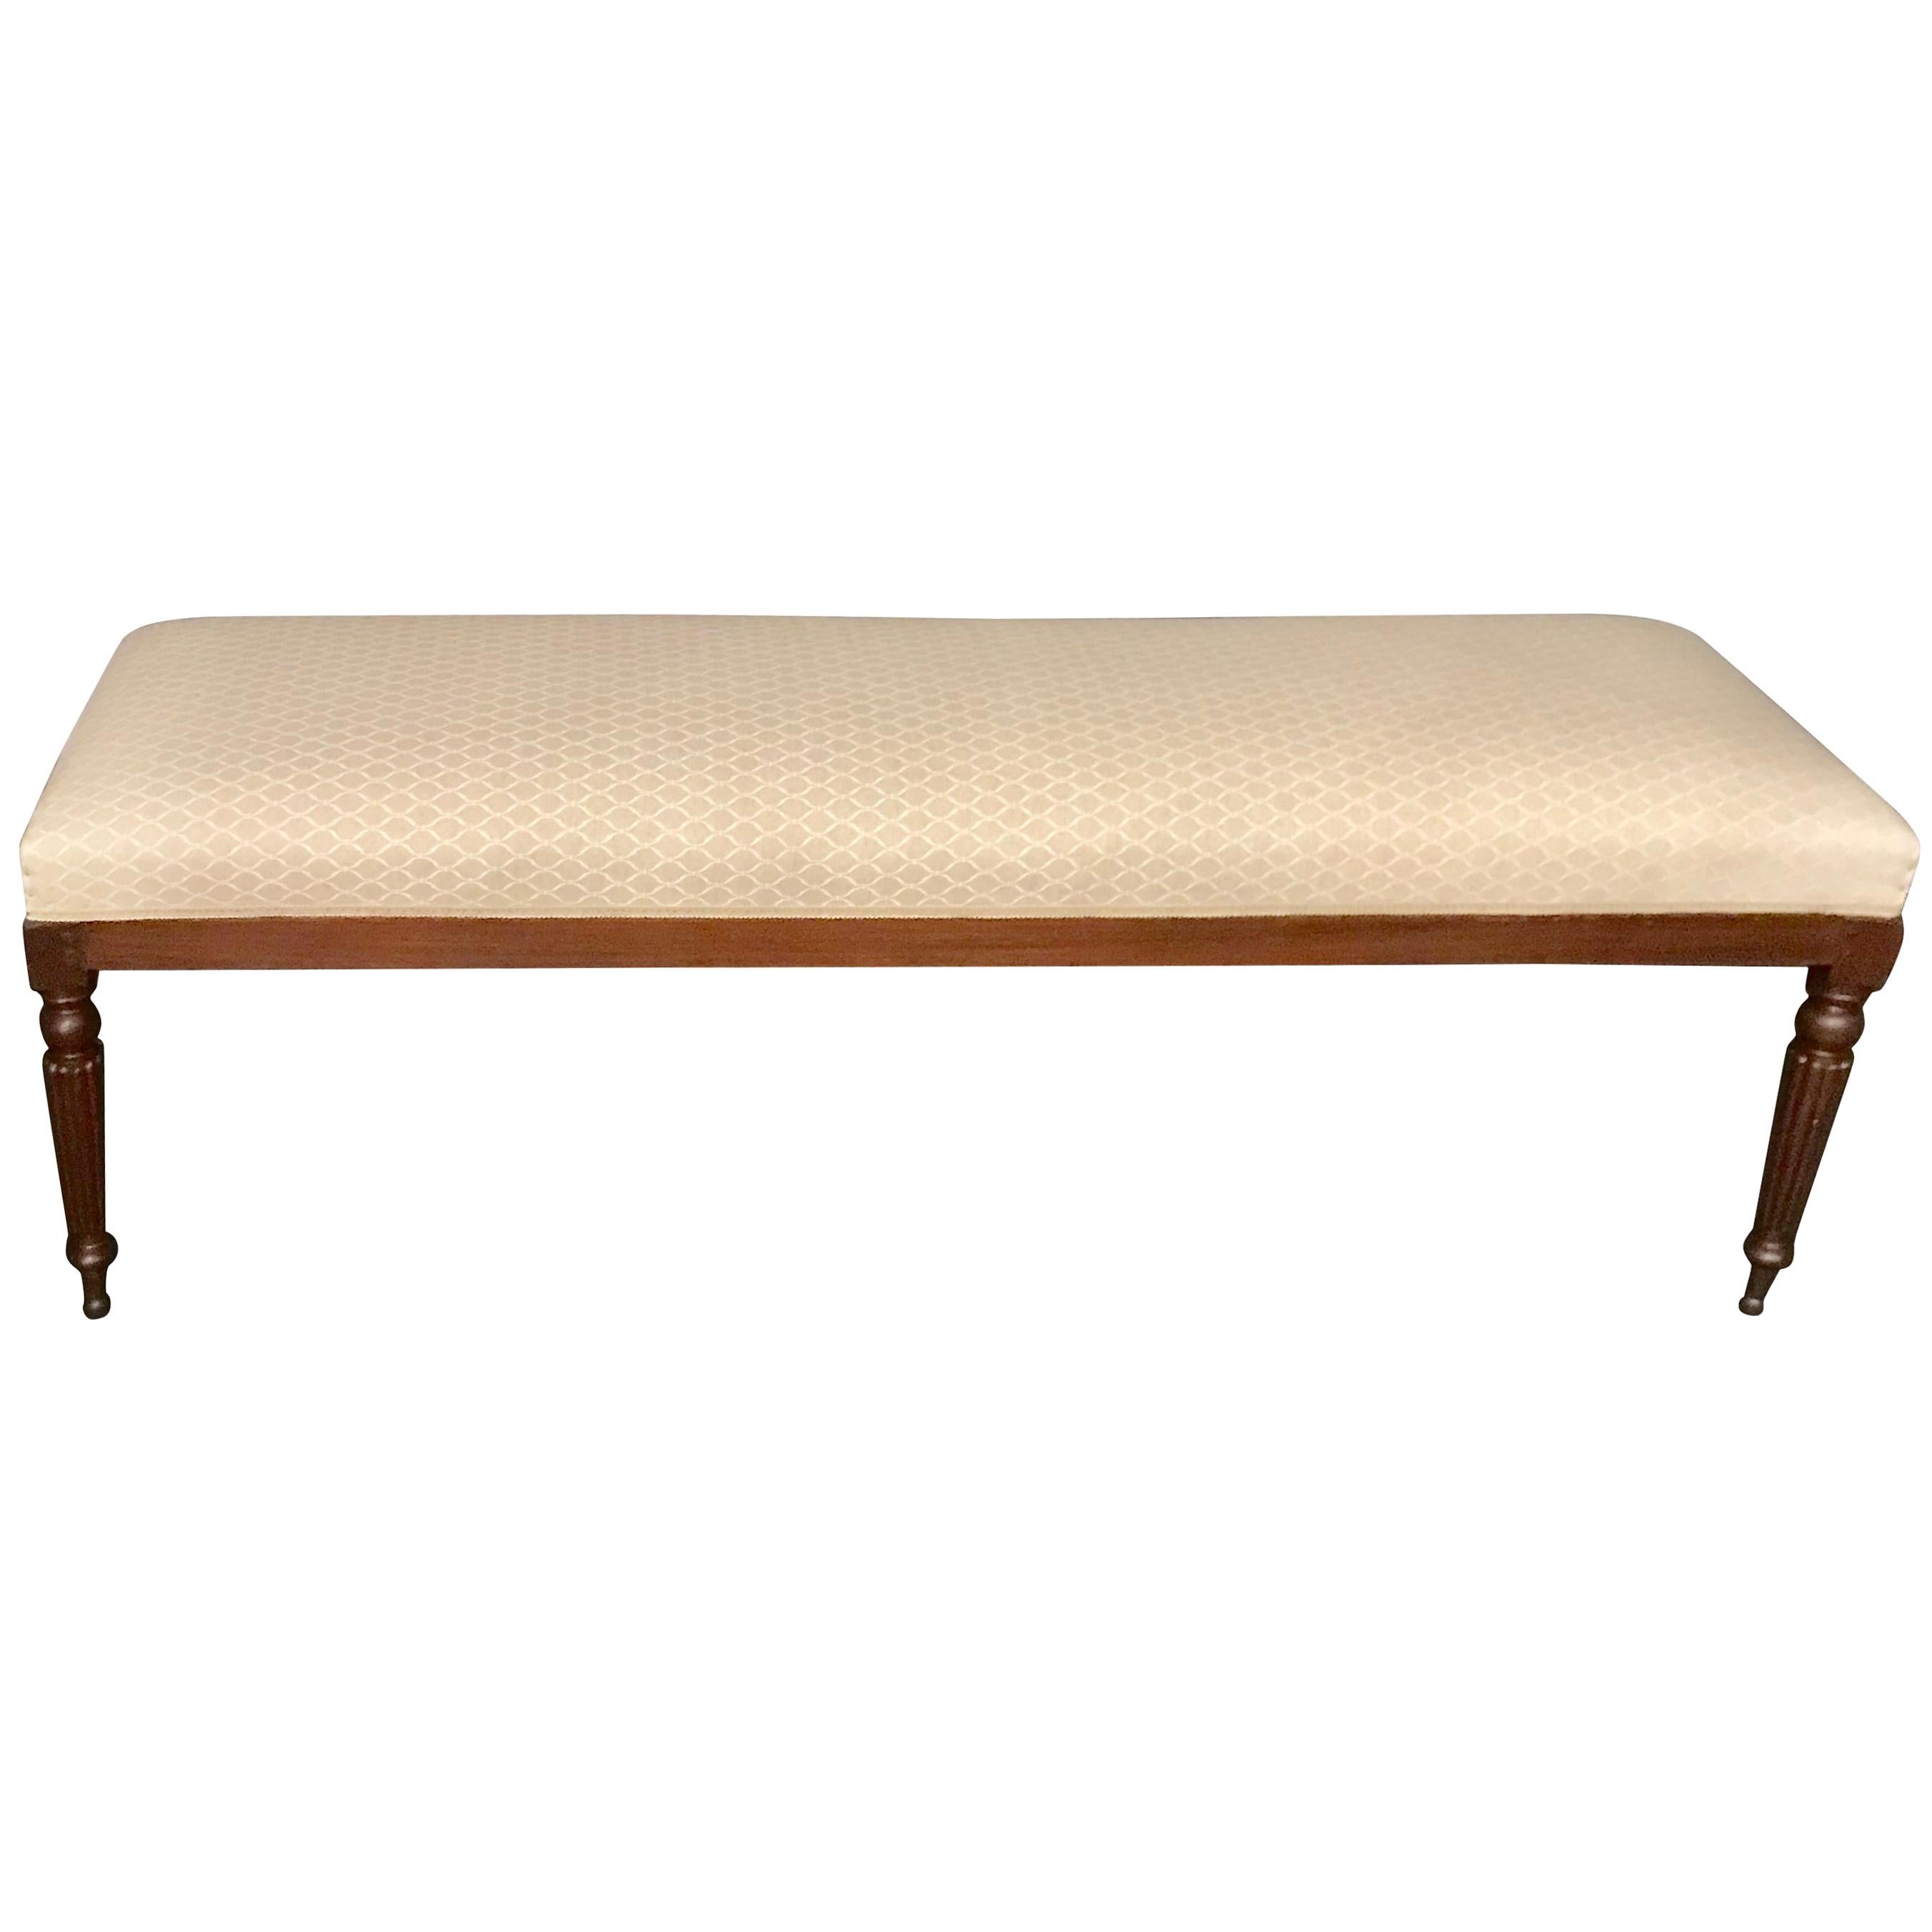 Upholstered Long Bench, Italy, 19th Century